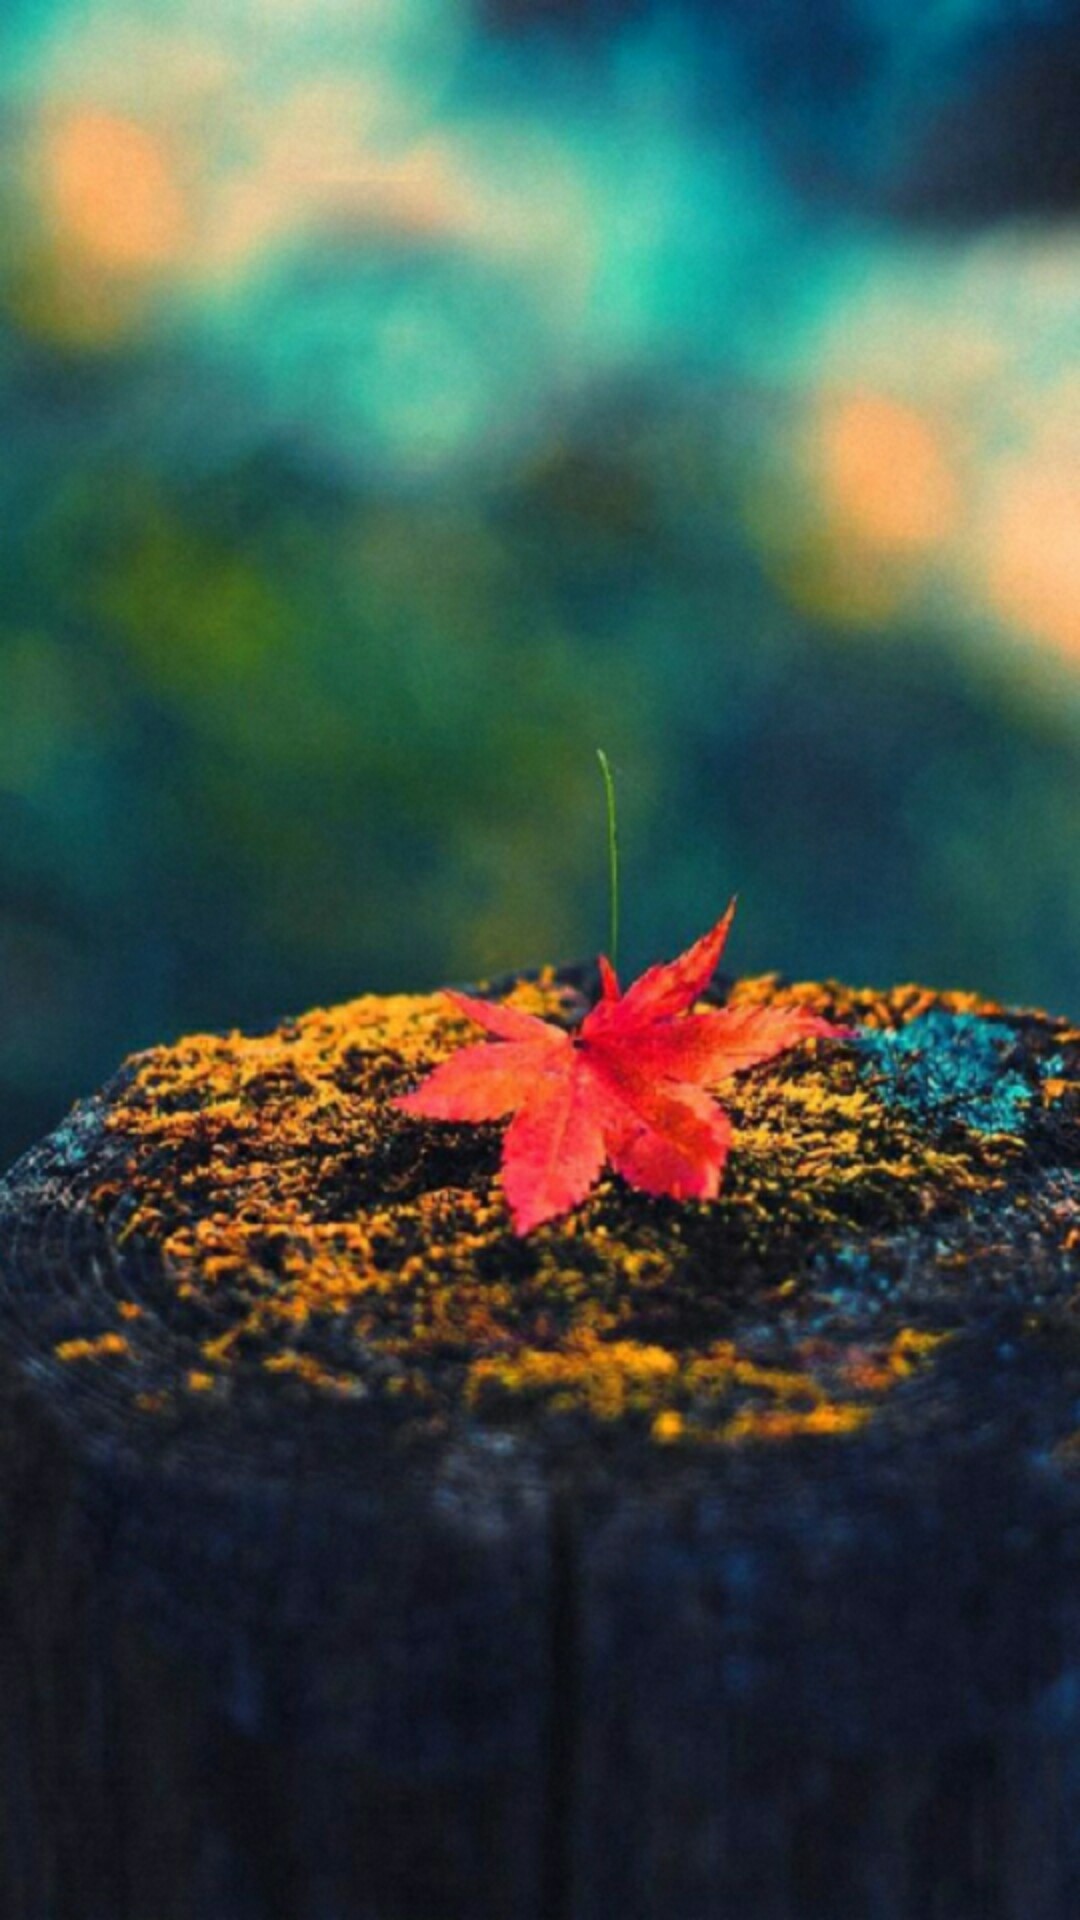 Fall Iphone 7s Wallpaper - Autumn Wallpapers For Iphone , HD Wallpaper & Backgrounds